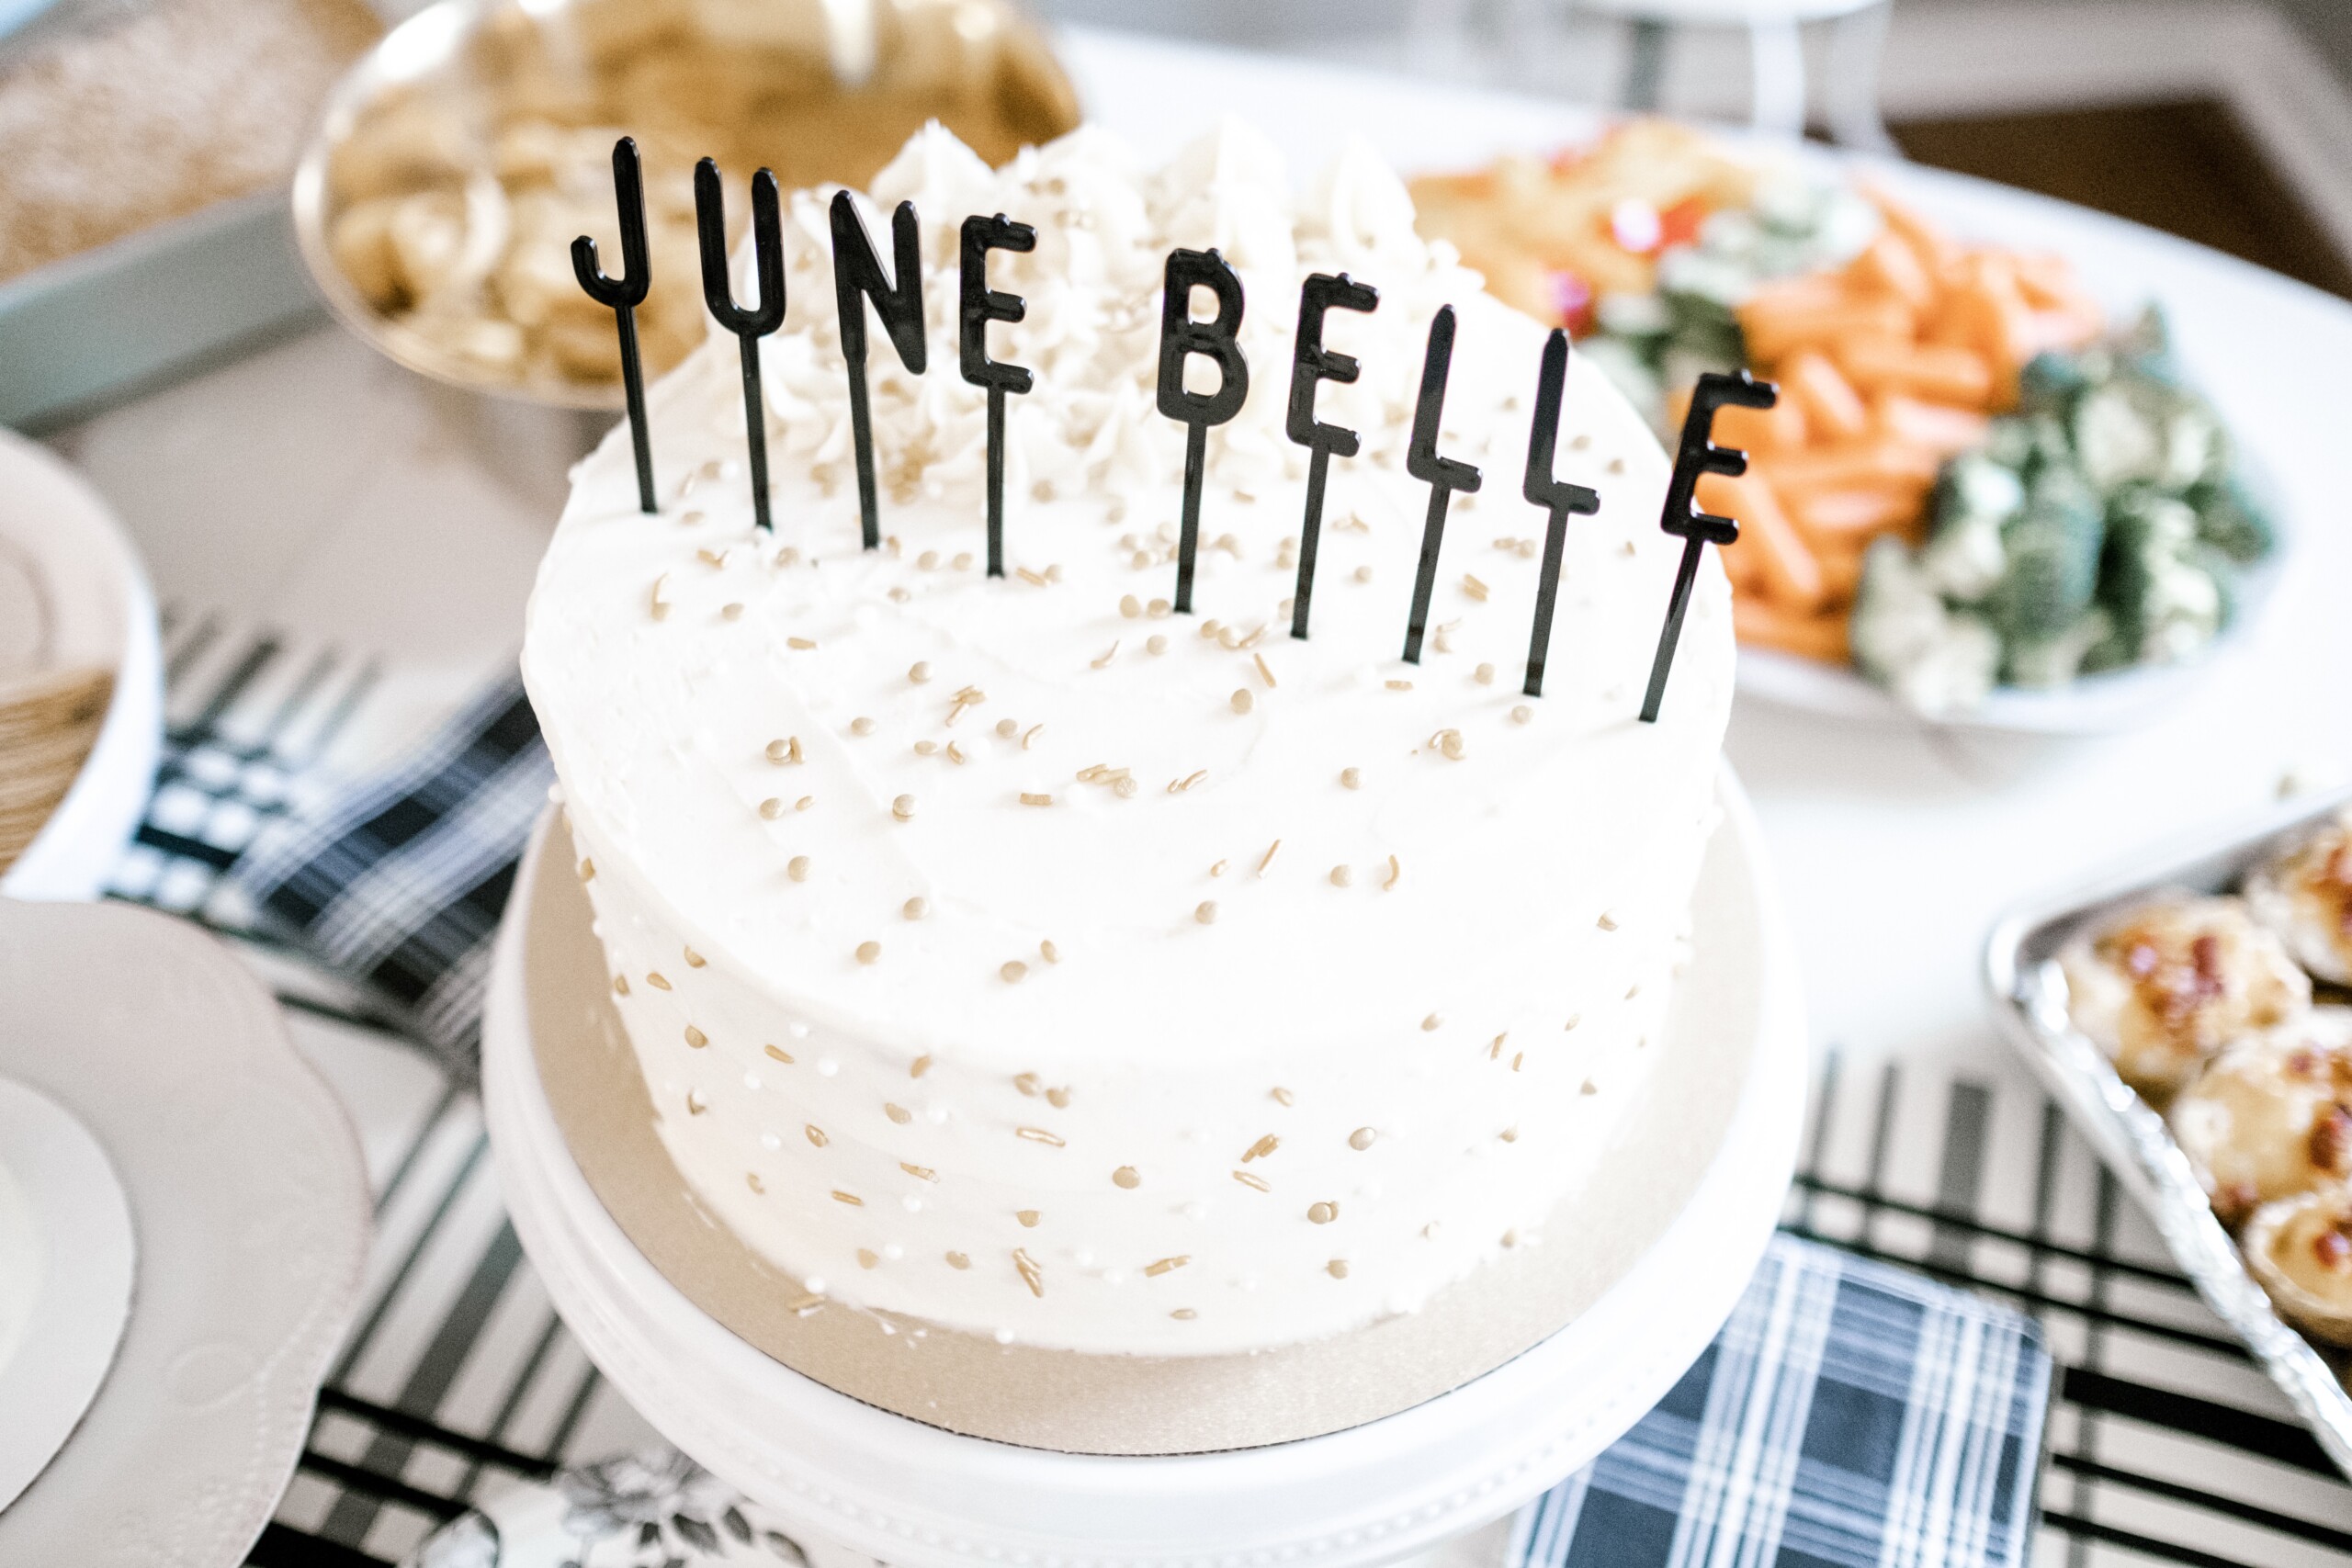 June Belle’s Bee Themed 1st Birthday Party